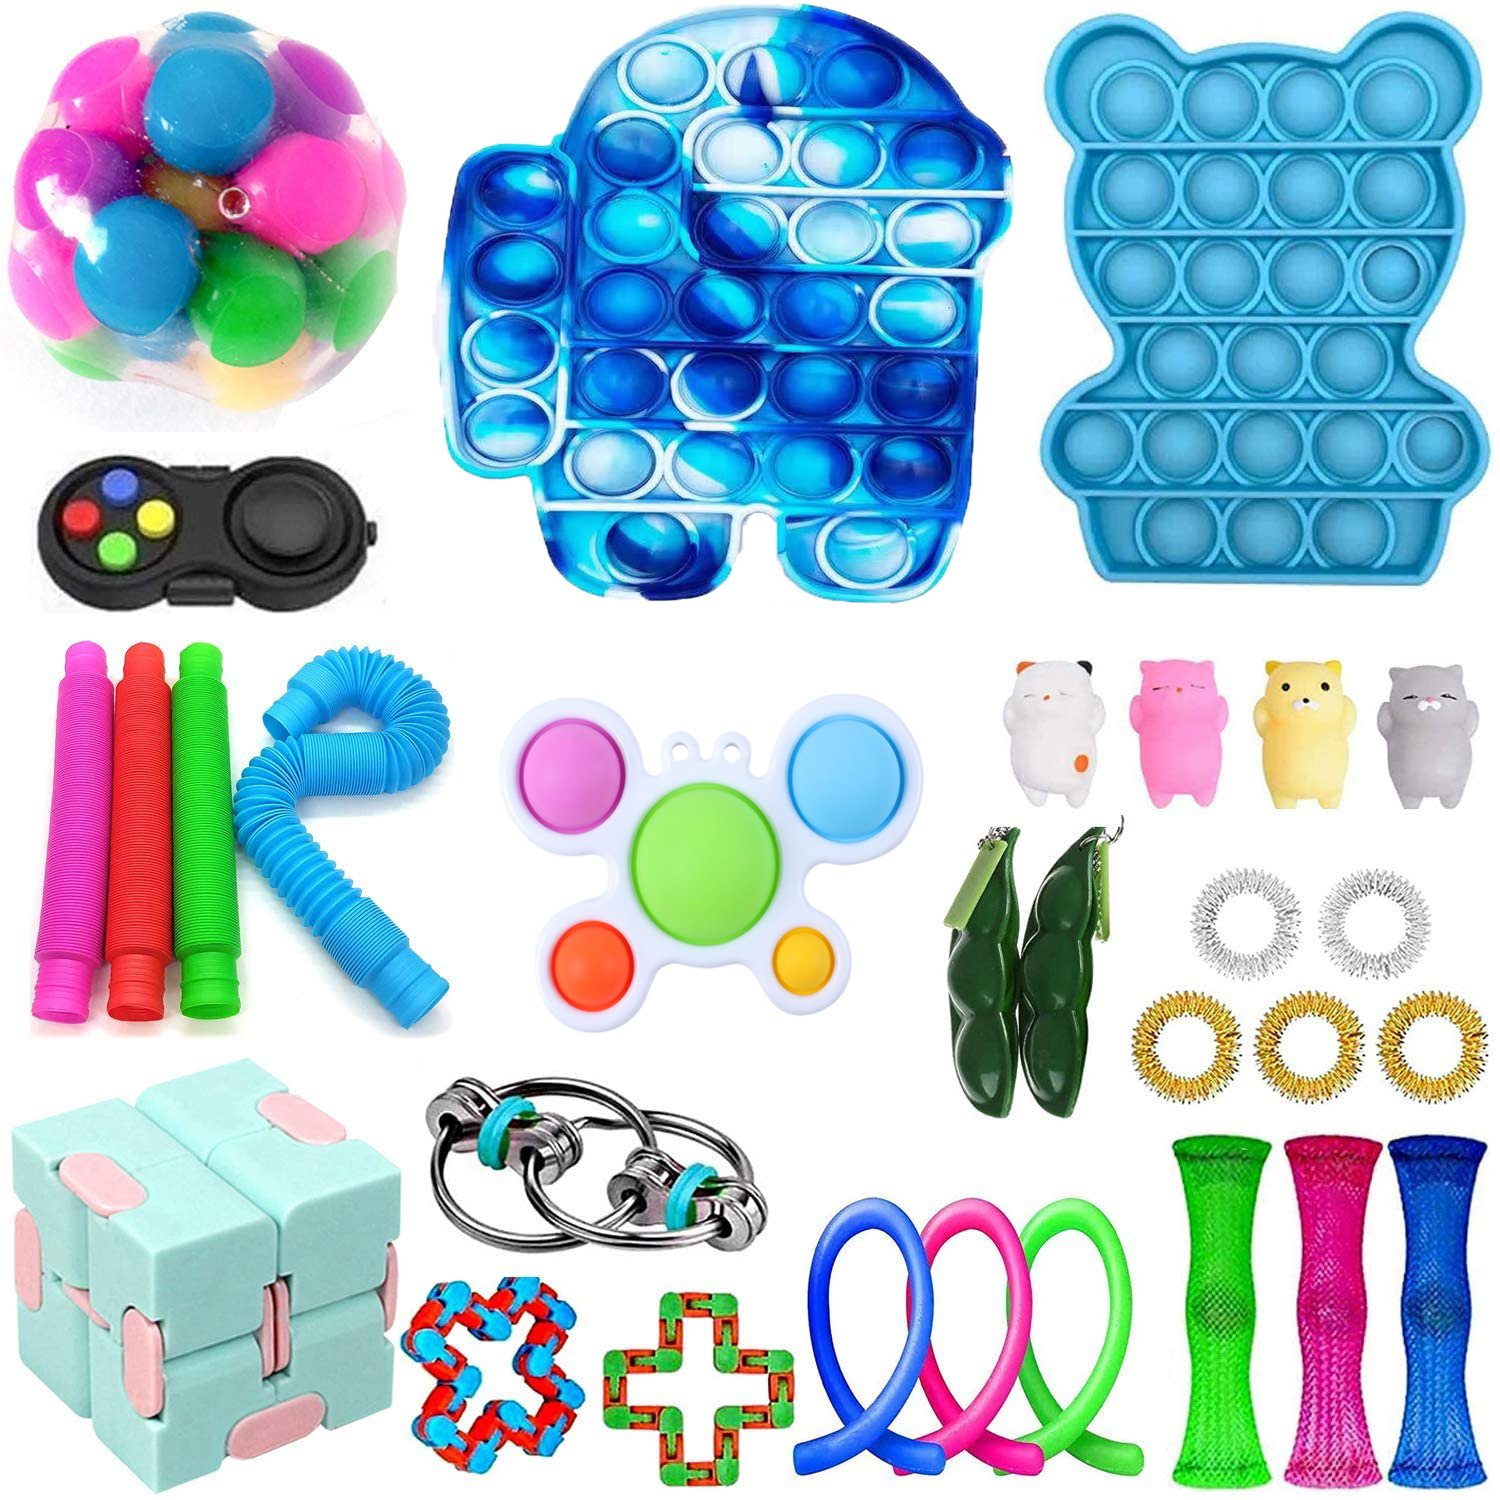 Details about   Fidget Toys Set Sensory Toy 4Pack For ADHD Stress Relief and Anti-Anxiety Gift 